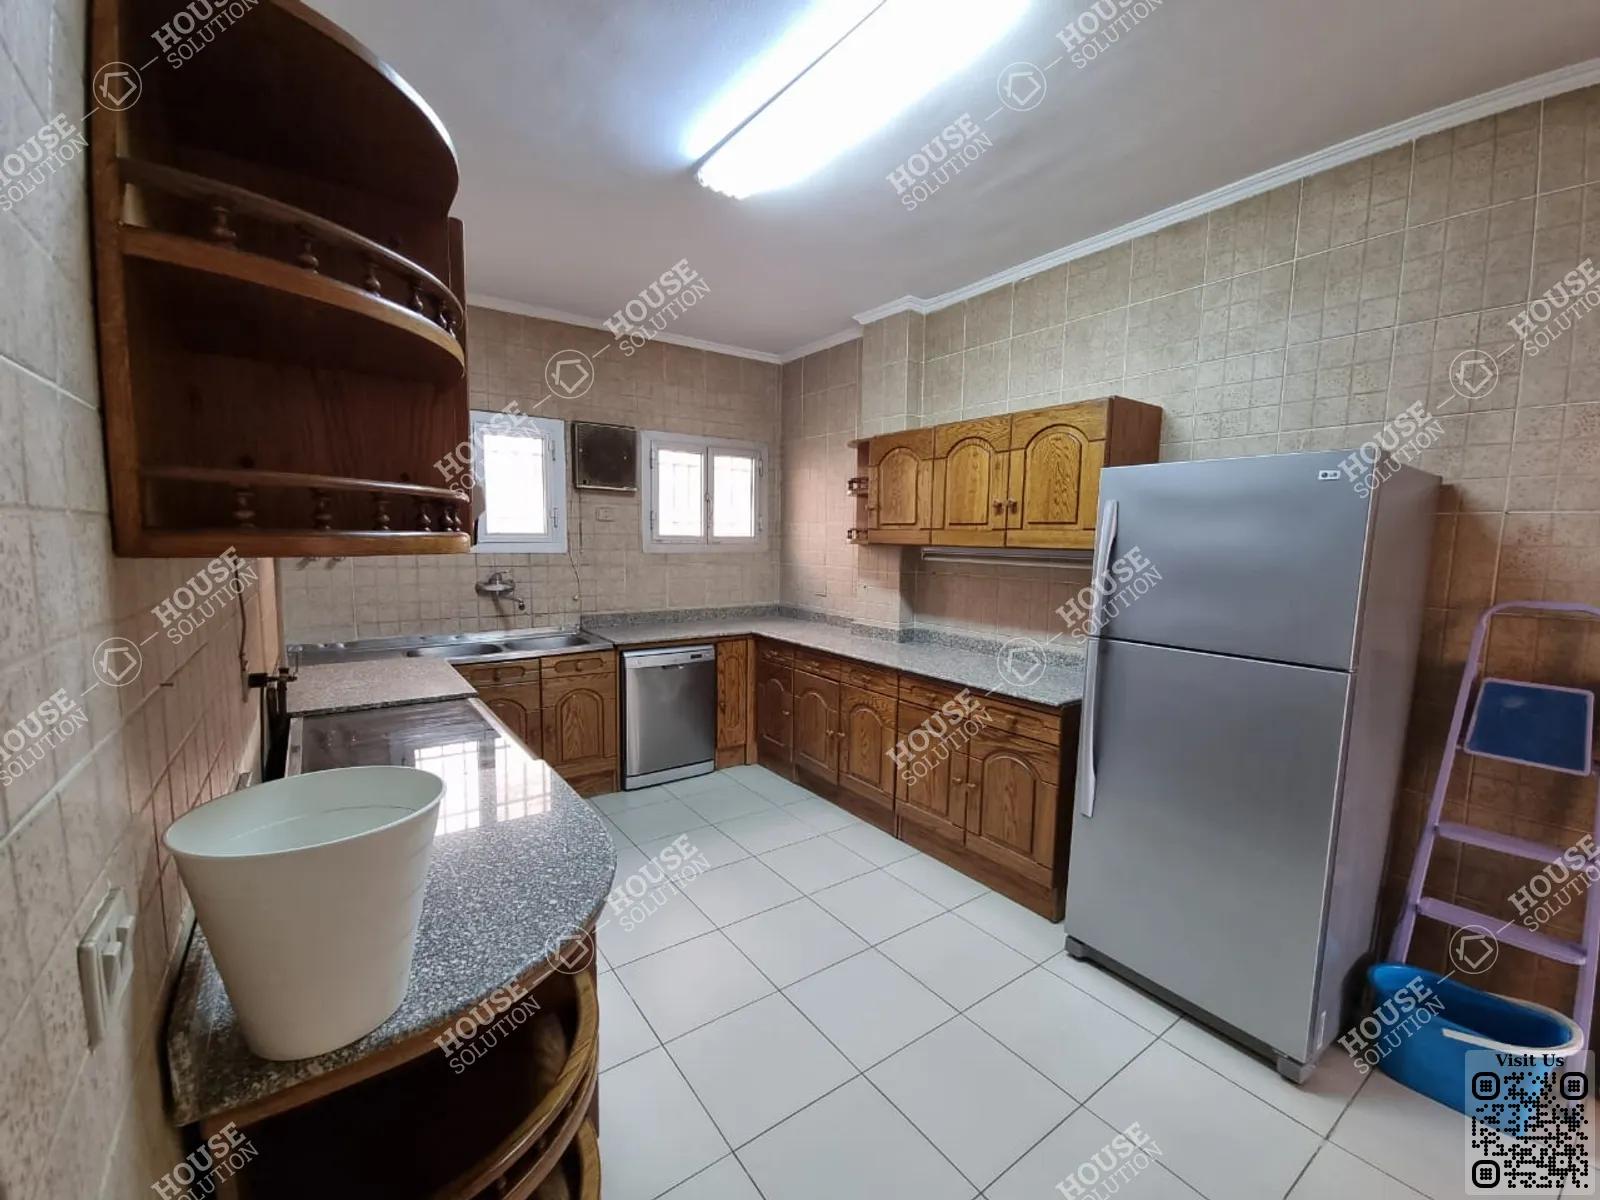 KITCHEN  @ Apartments For Rent In Maadi Maadi Sarayat Area: 300 m² consists of 4 Bedrooms 3 Bathrooms Furnished 5 stars #3404-2